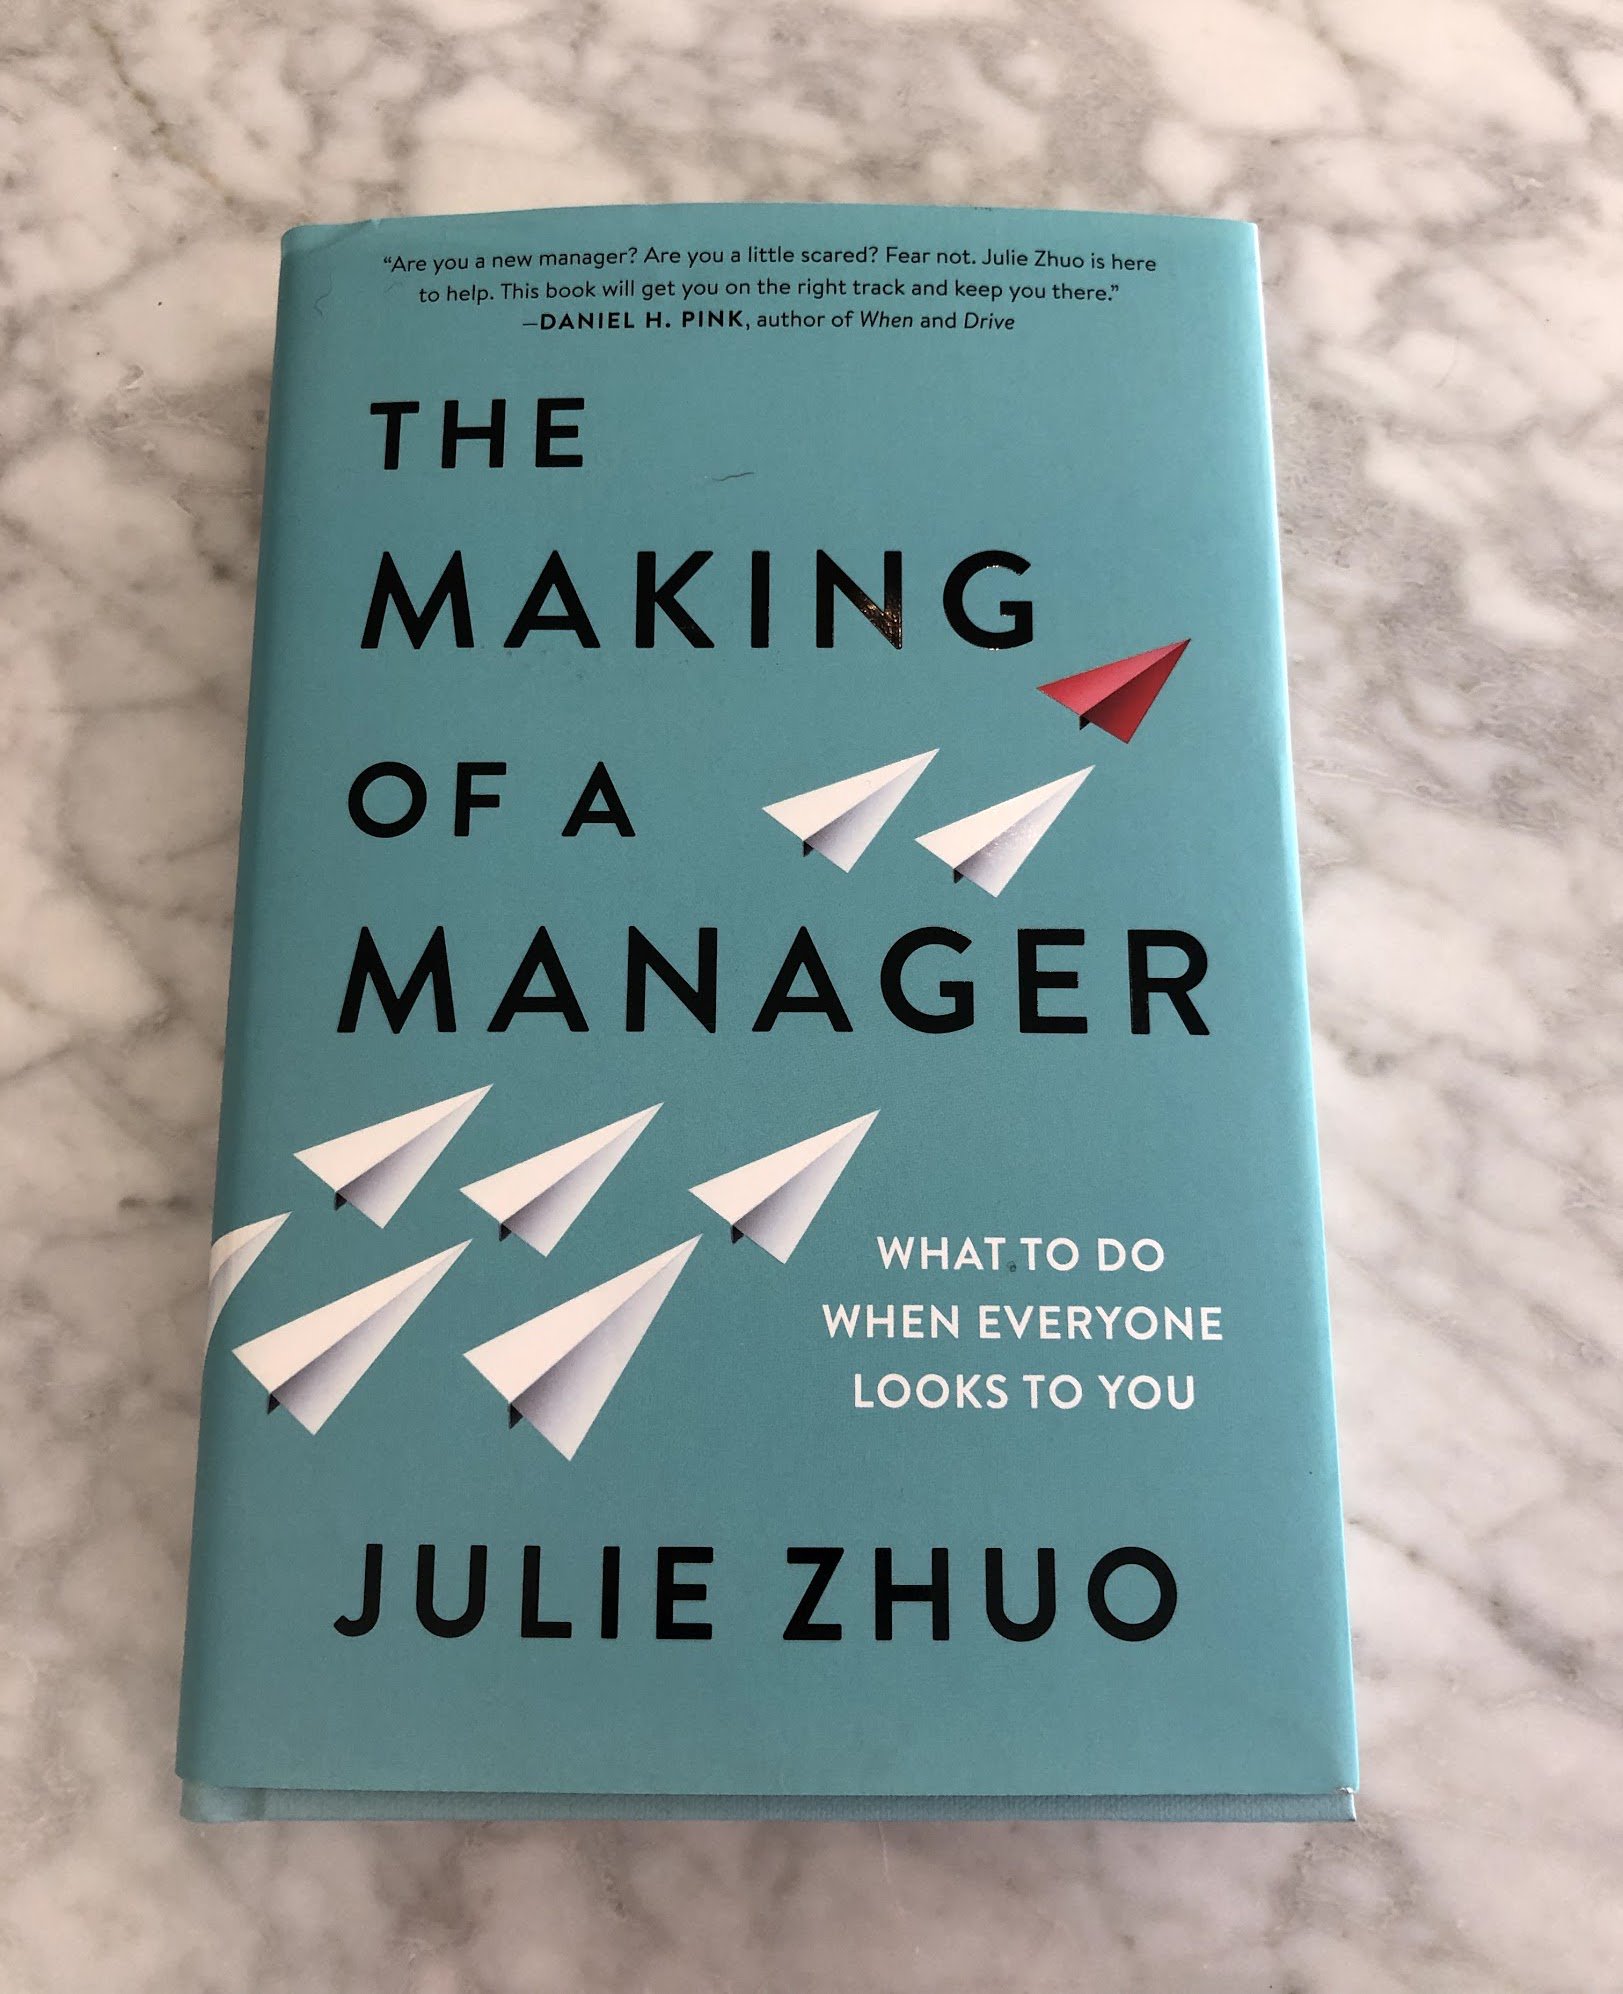 Matter New Book Added To Our Office S Library We Highly Recommend It The Making Of A Manager T Co Jhgeh8e7z4 Thank You Joulee T Co 7dqqvbra4i